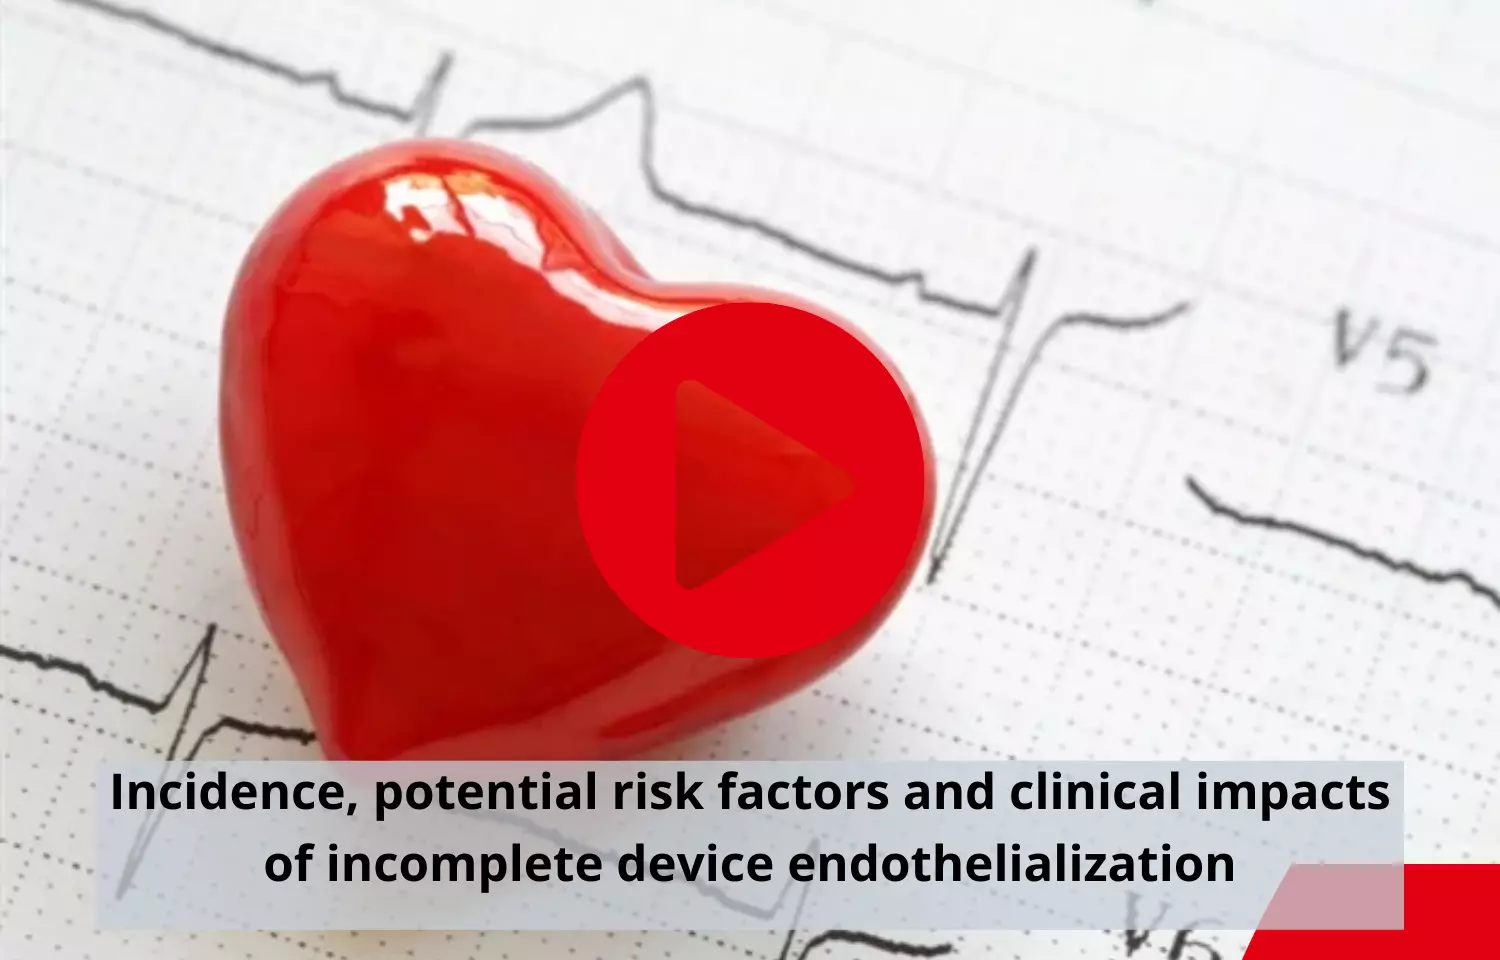 Incidence, potential risk factors and clinical impacts of incomplete device endothelialization